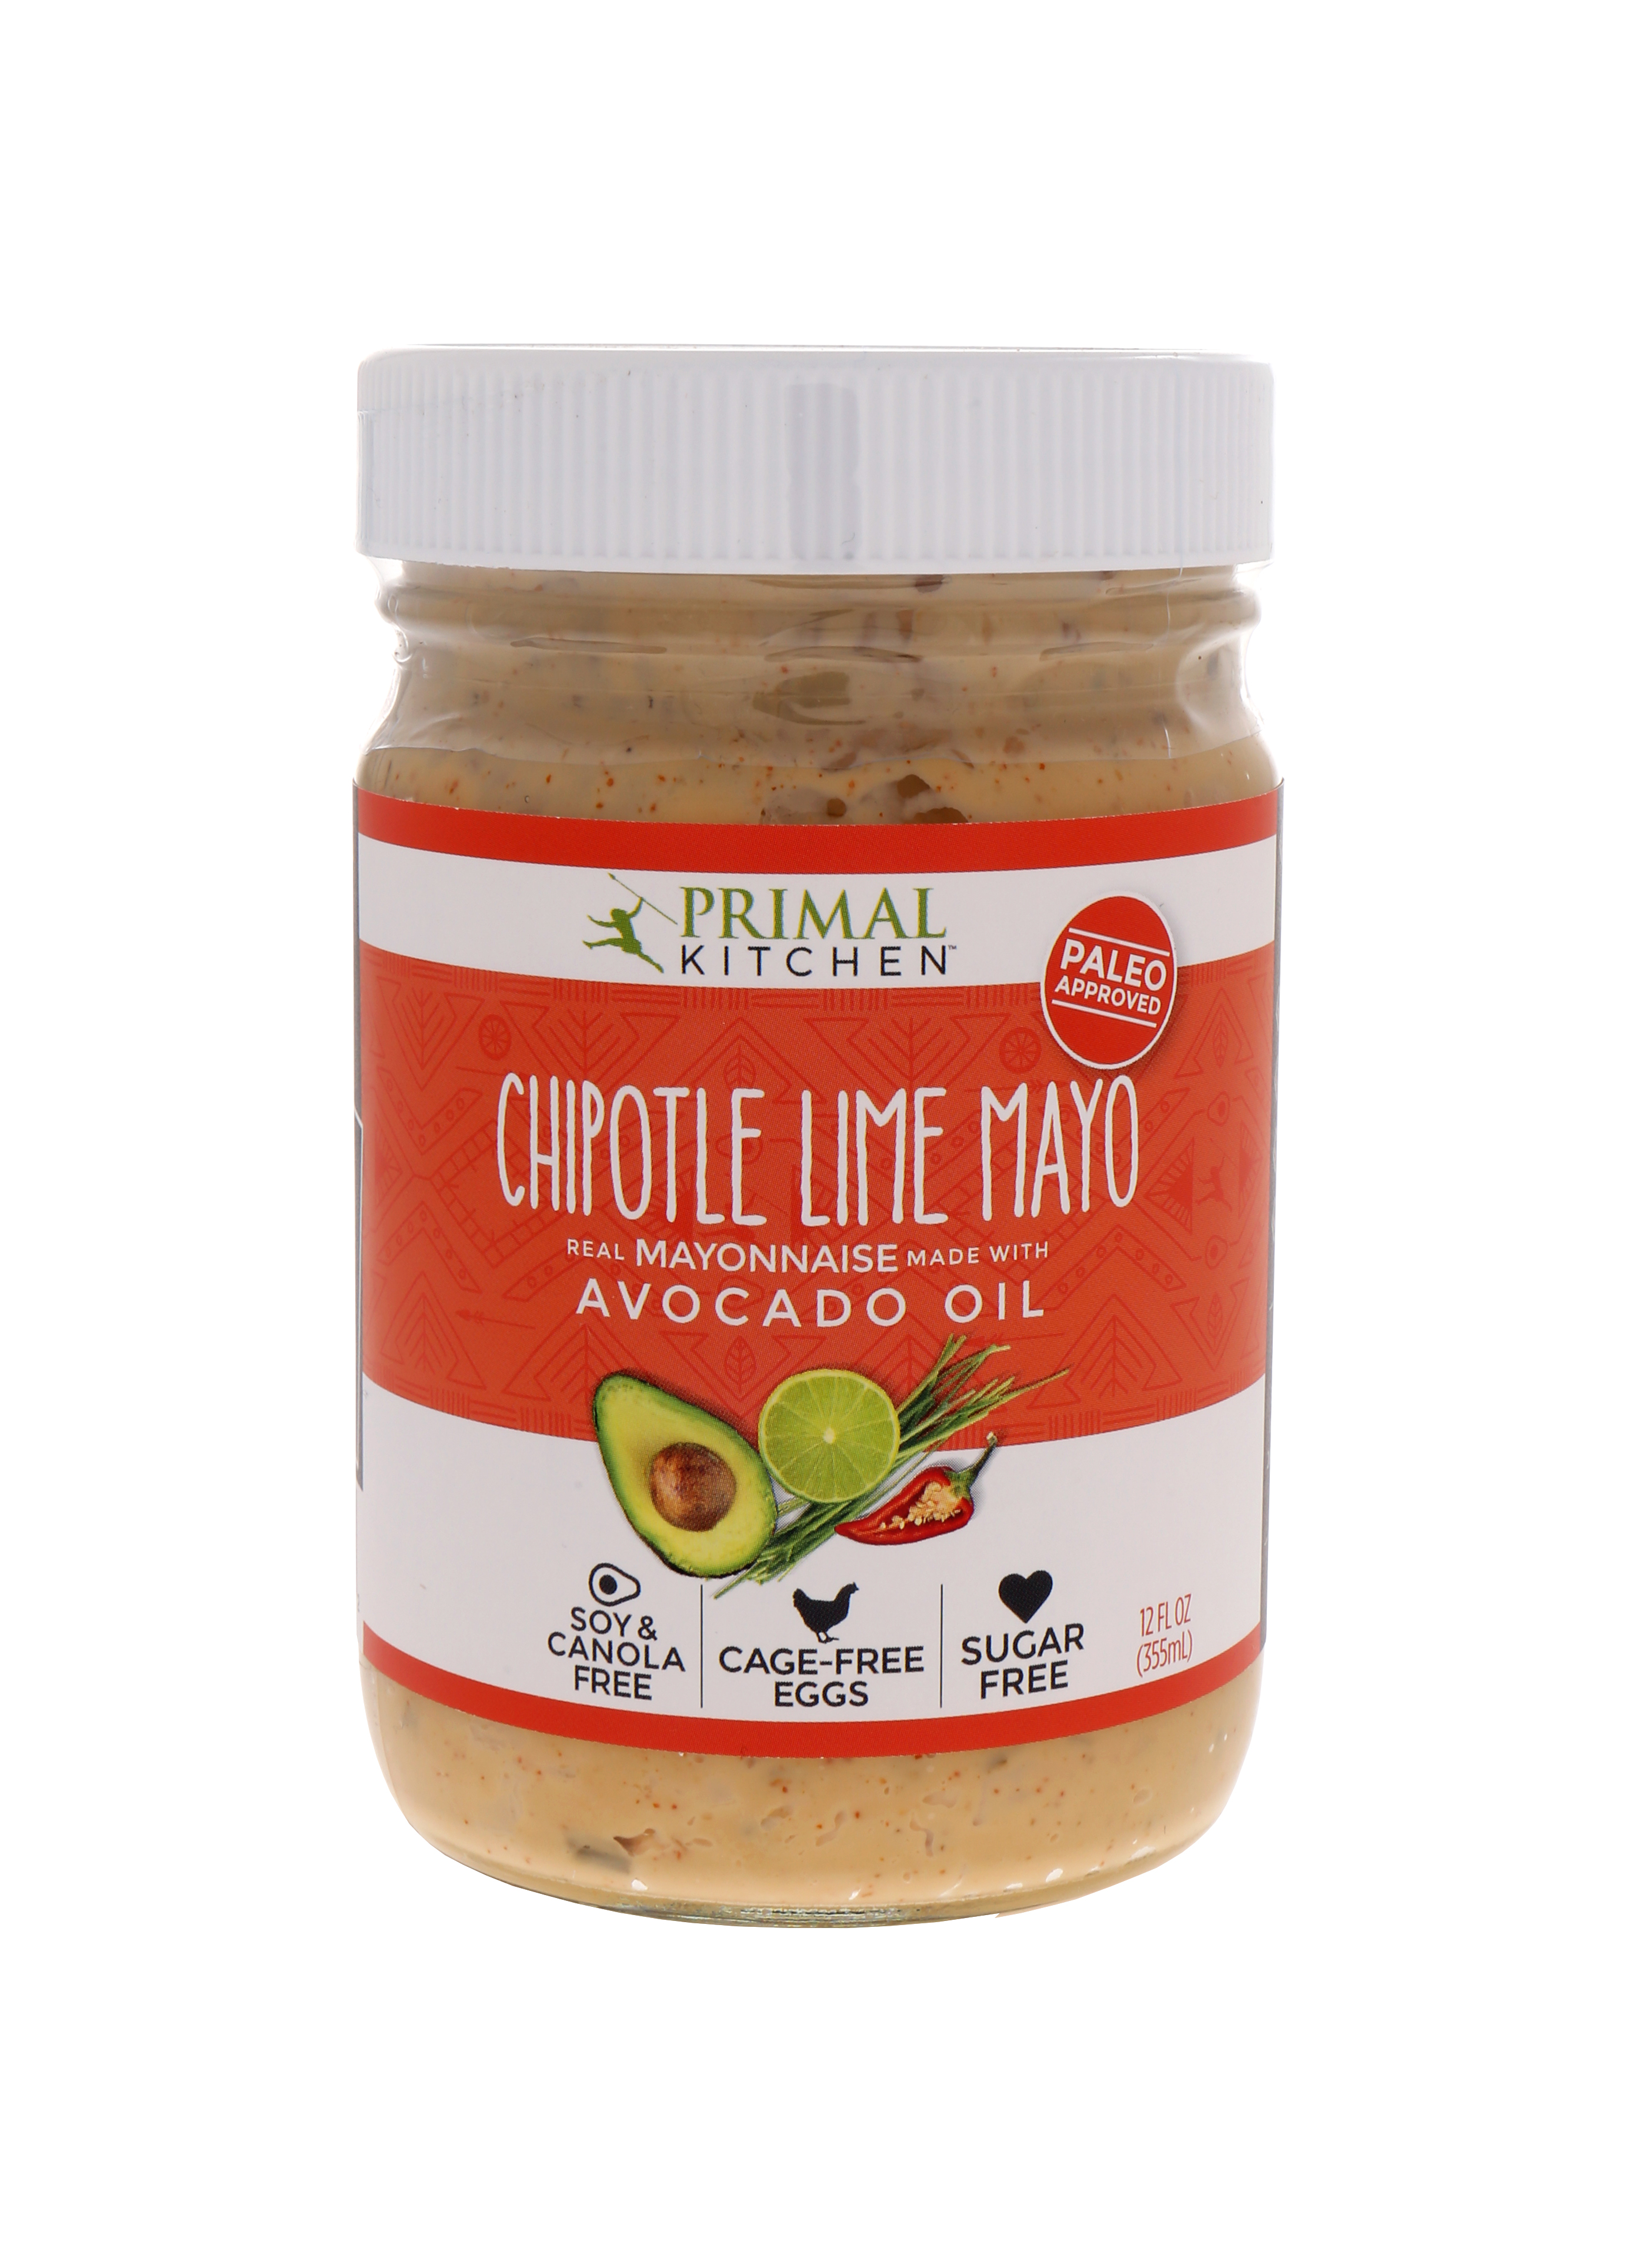 Primal Kitchen Chipotle Lime Mayo, Real Mayonnaise Made With Avocado Oil:  Calories, Nutrition Analysis & More